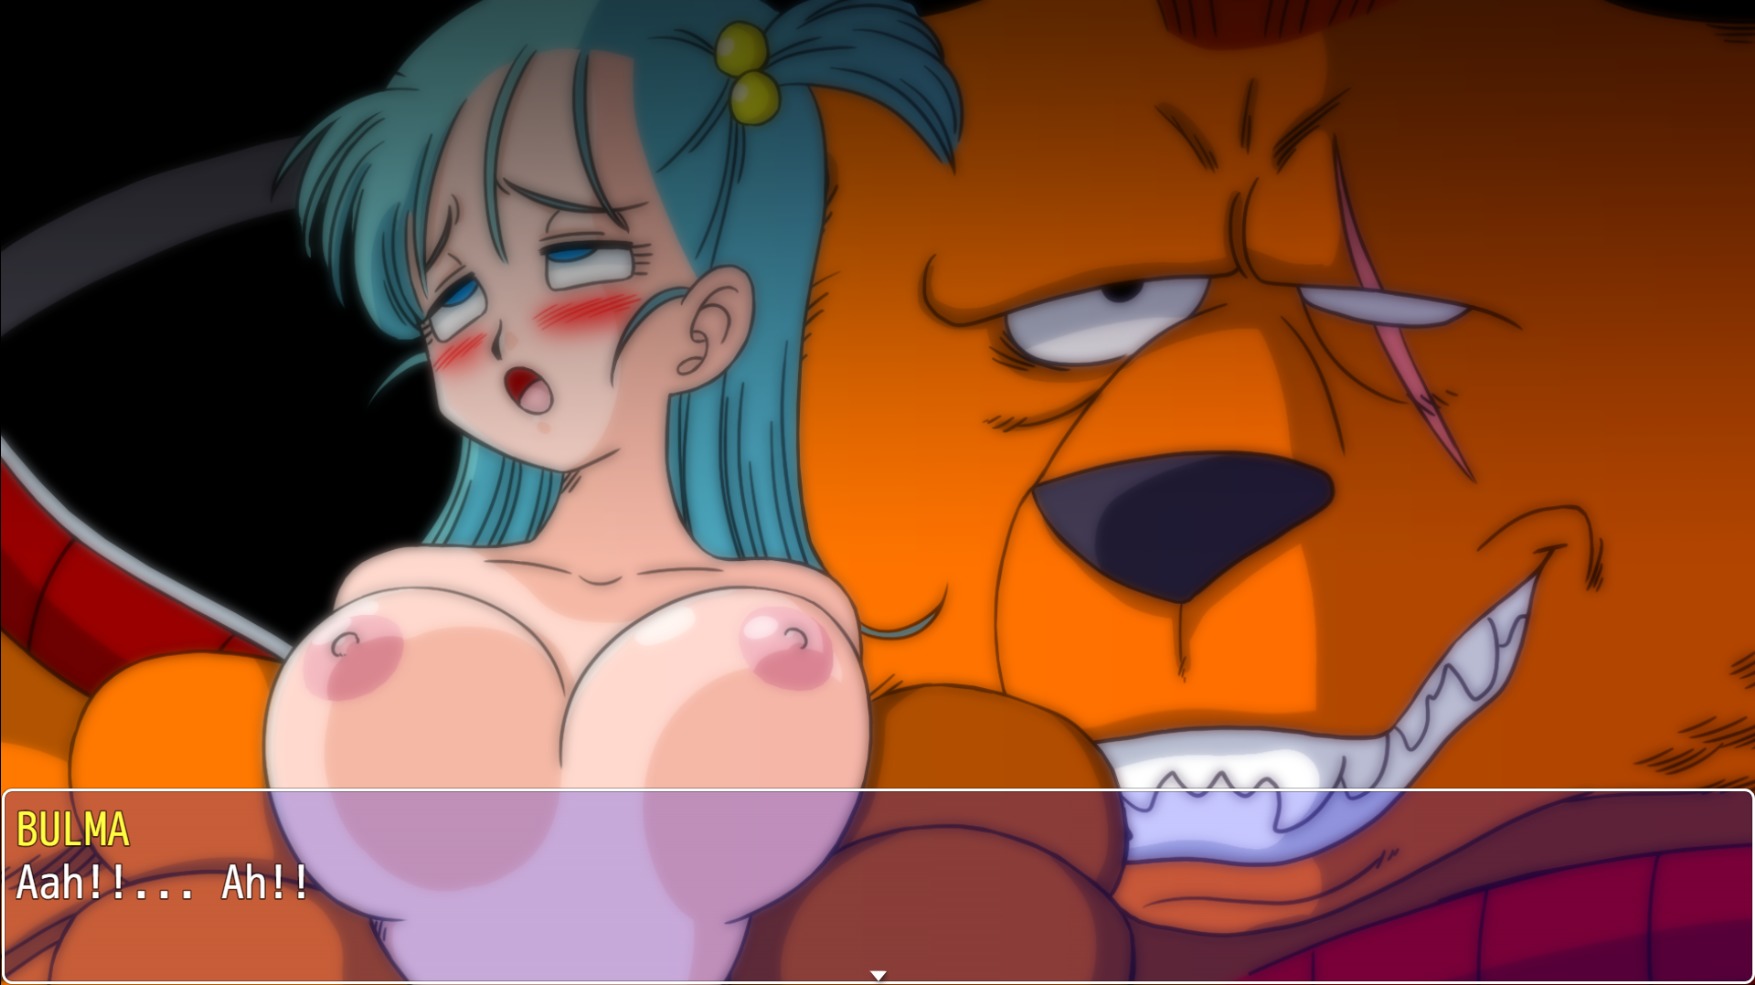 Bulma adventure porn game free download for android